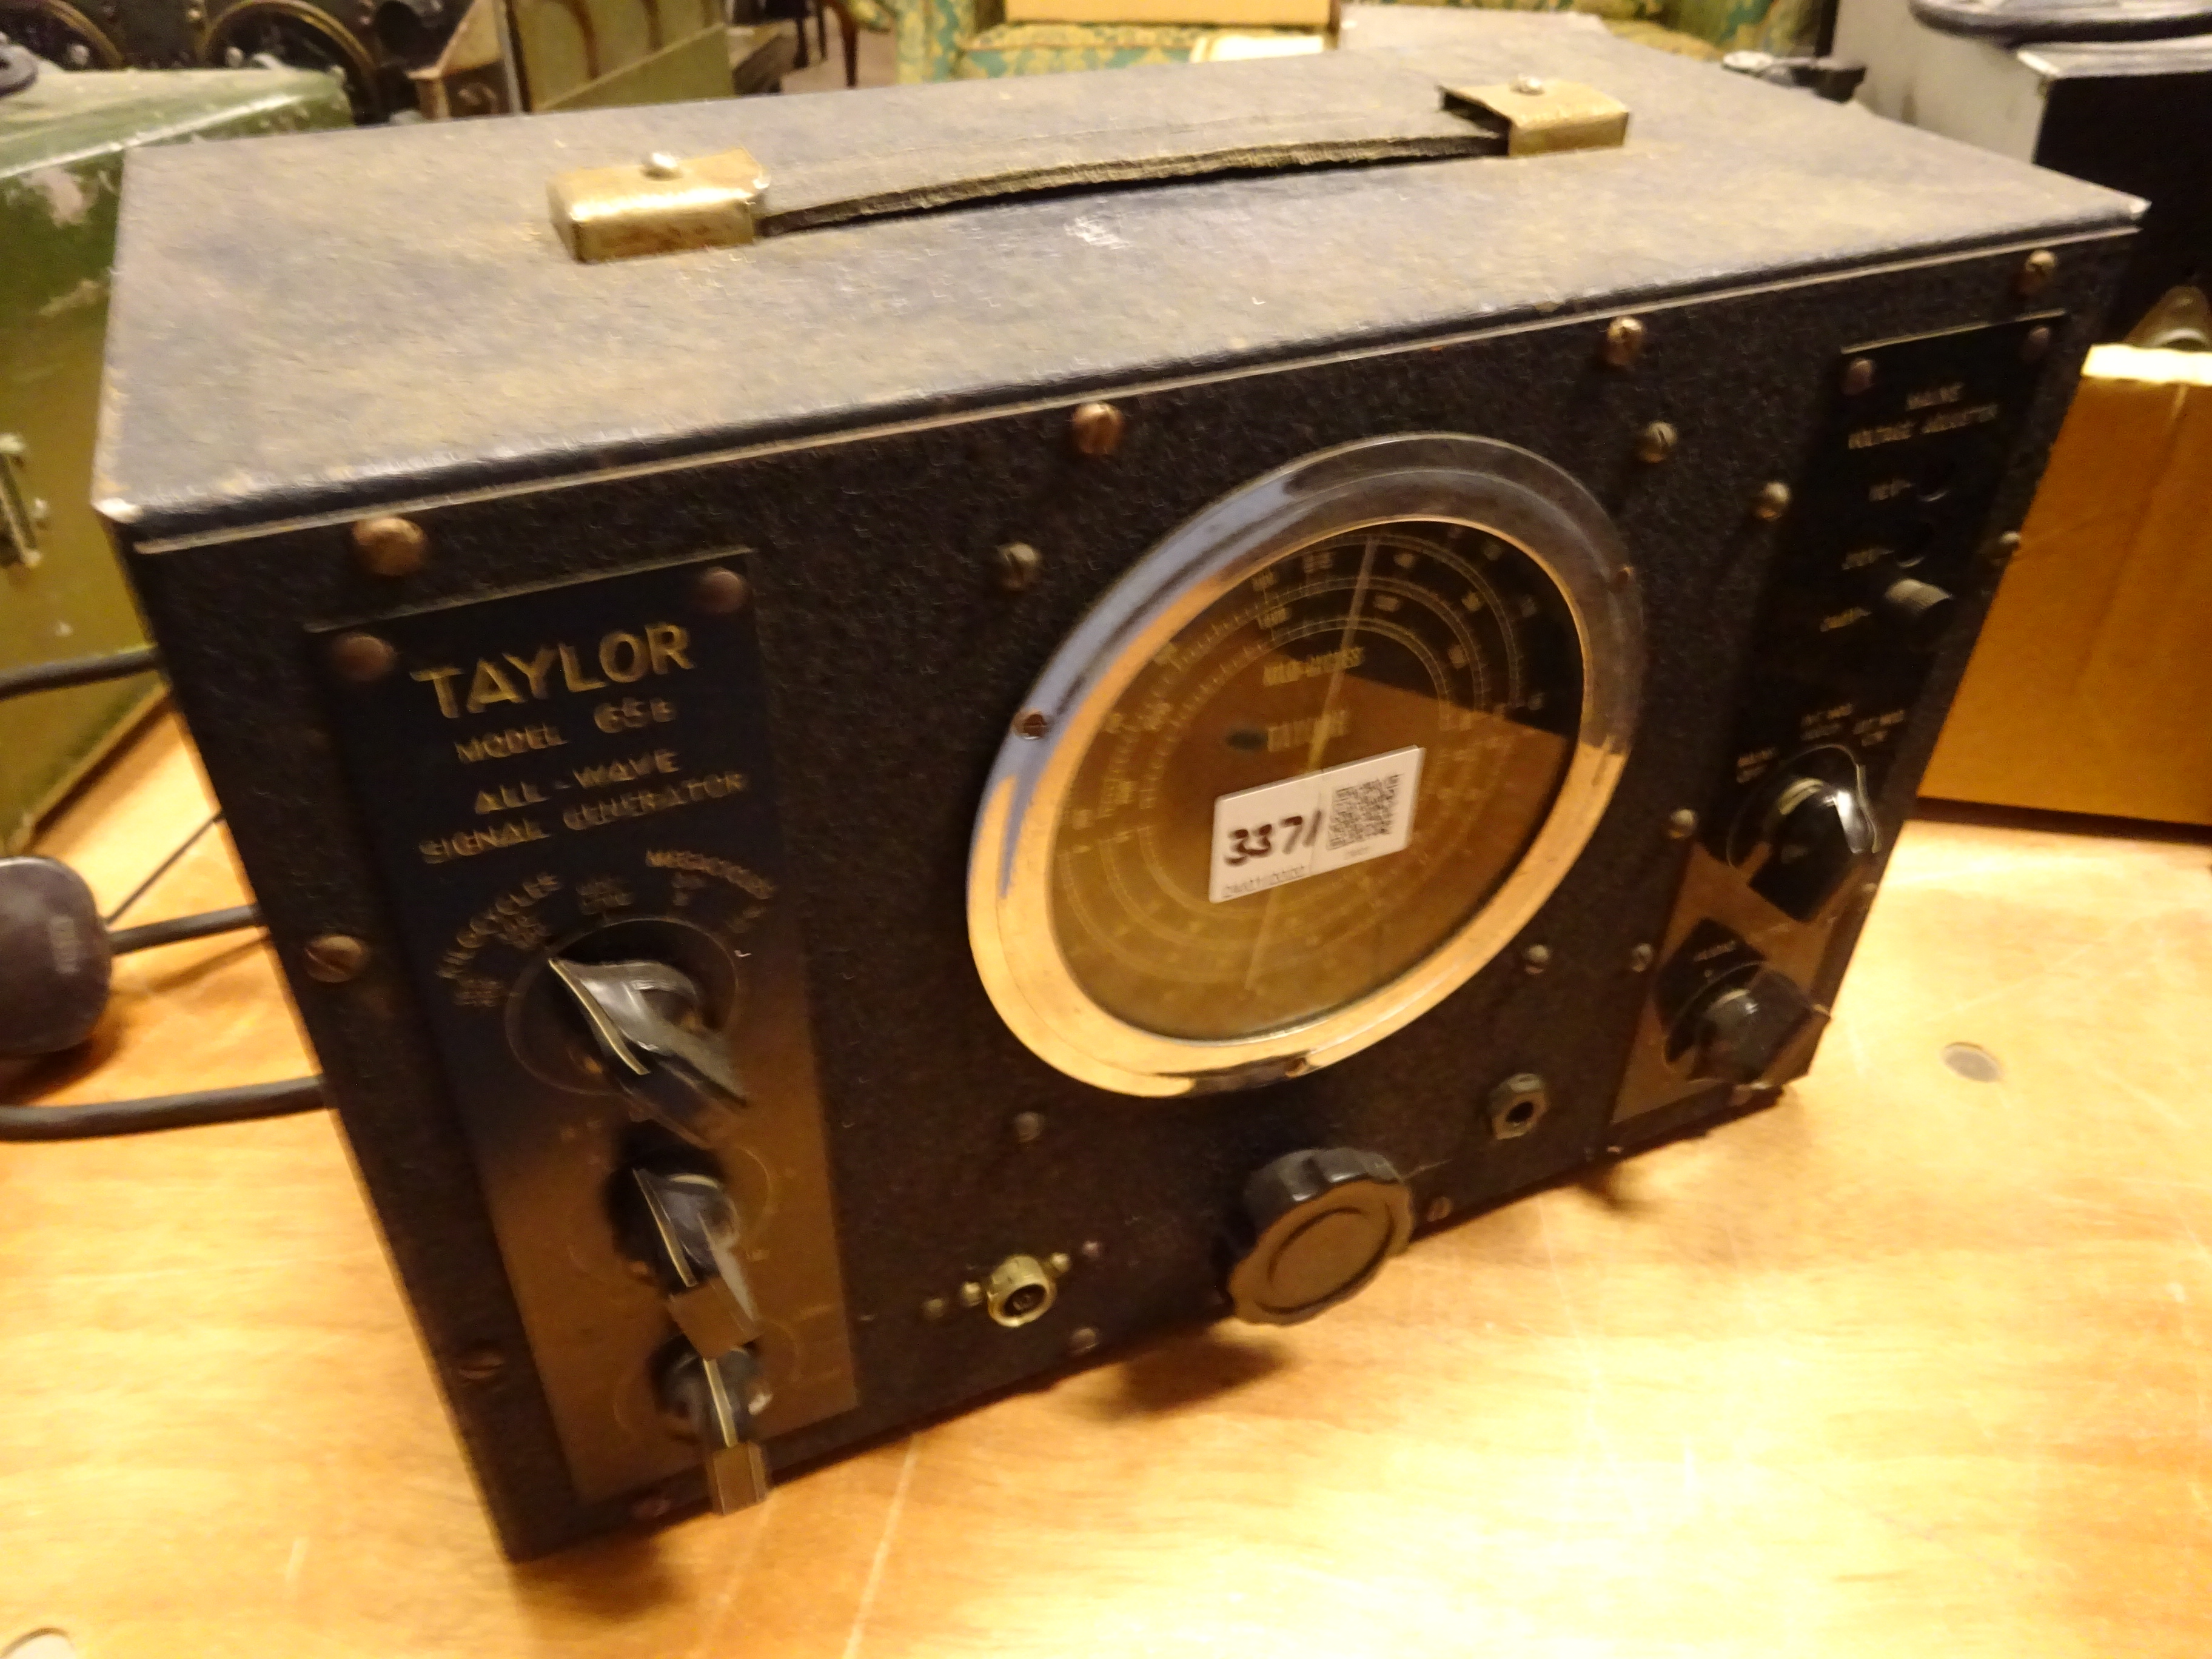 Communication equipment including Taylor Model 65B All-Wave Signal Generator, - Image 3 of 4